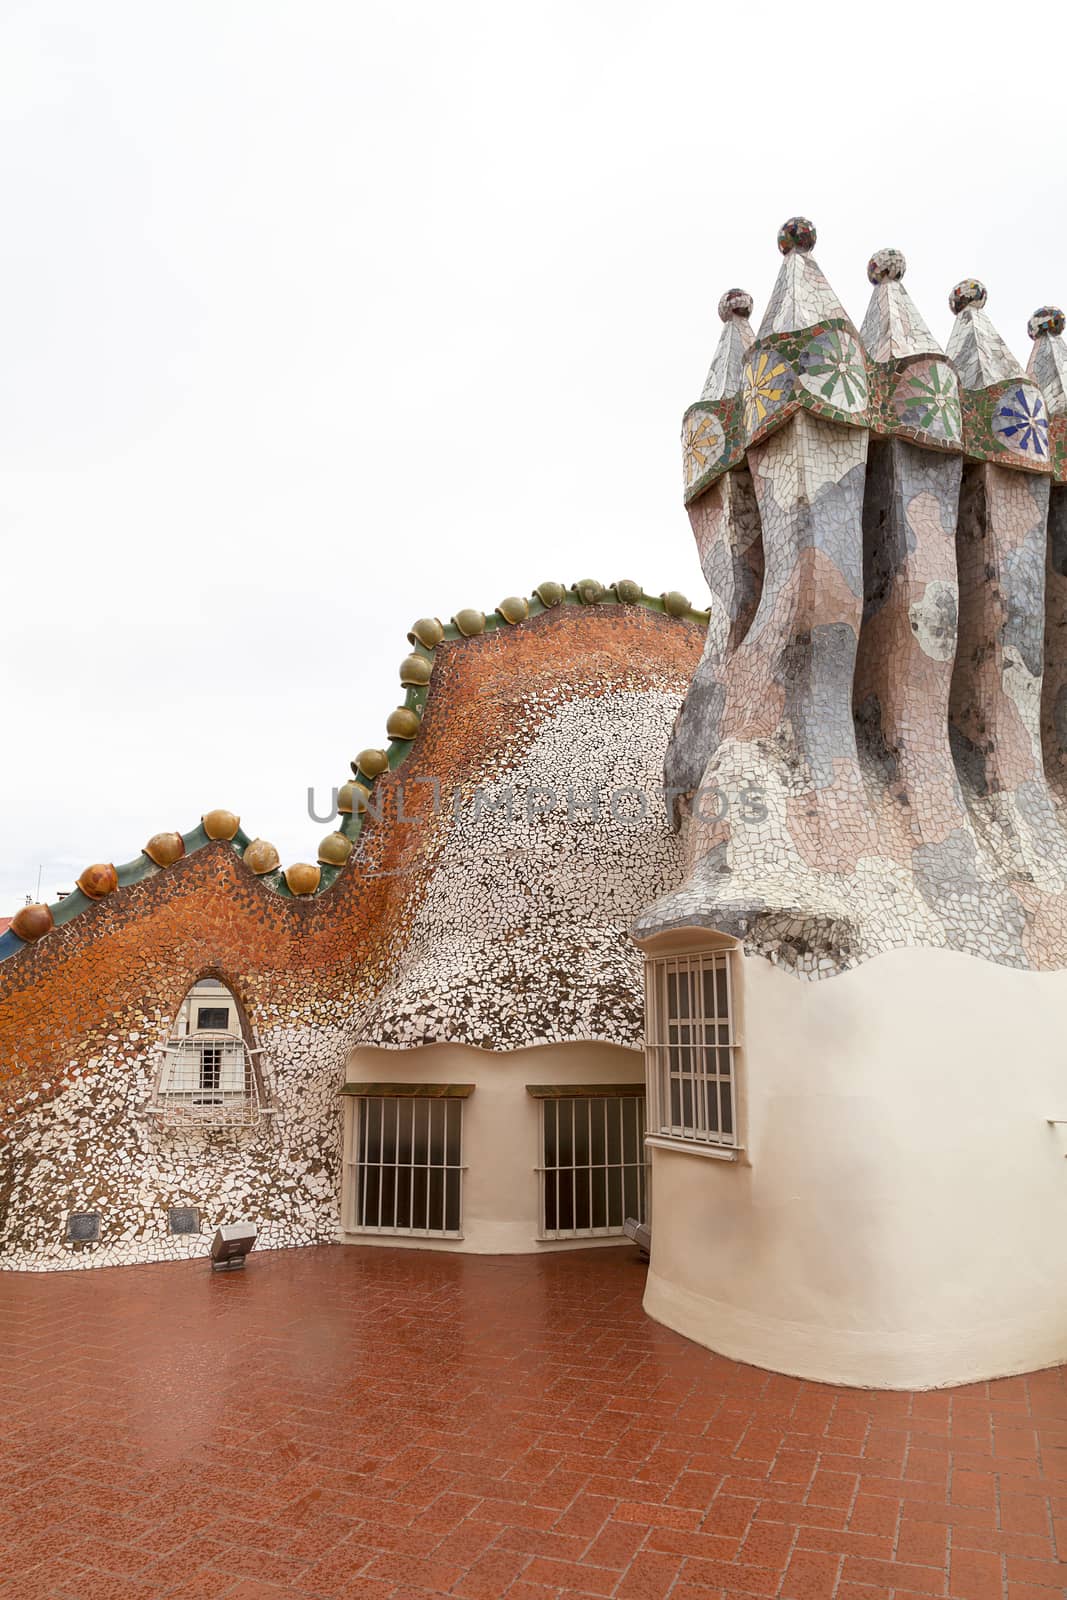 Barcelona, Spain - May 11,2016 : Casa Batllo,  housetop , chimneys with ceramic mosaic. Building  redesigned in 1904 by Gaudi located in the center of Barcelona, it  is on the UNESCO World Heritage Site.